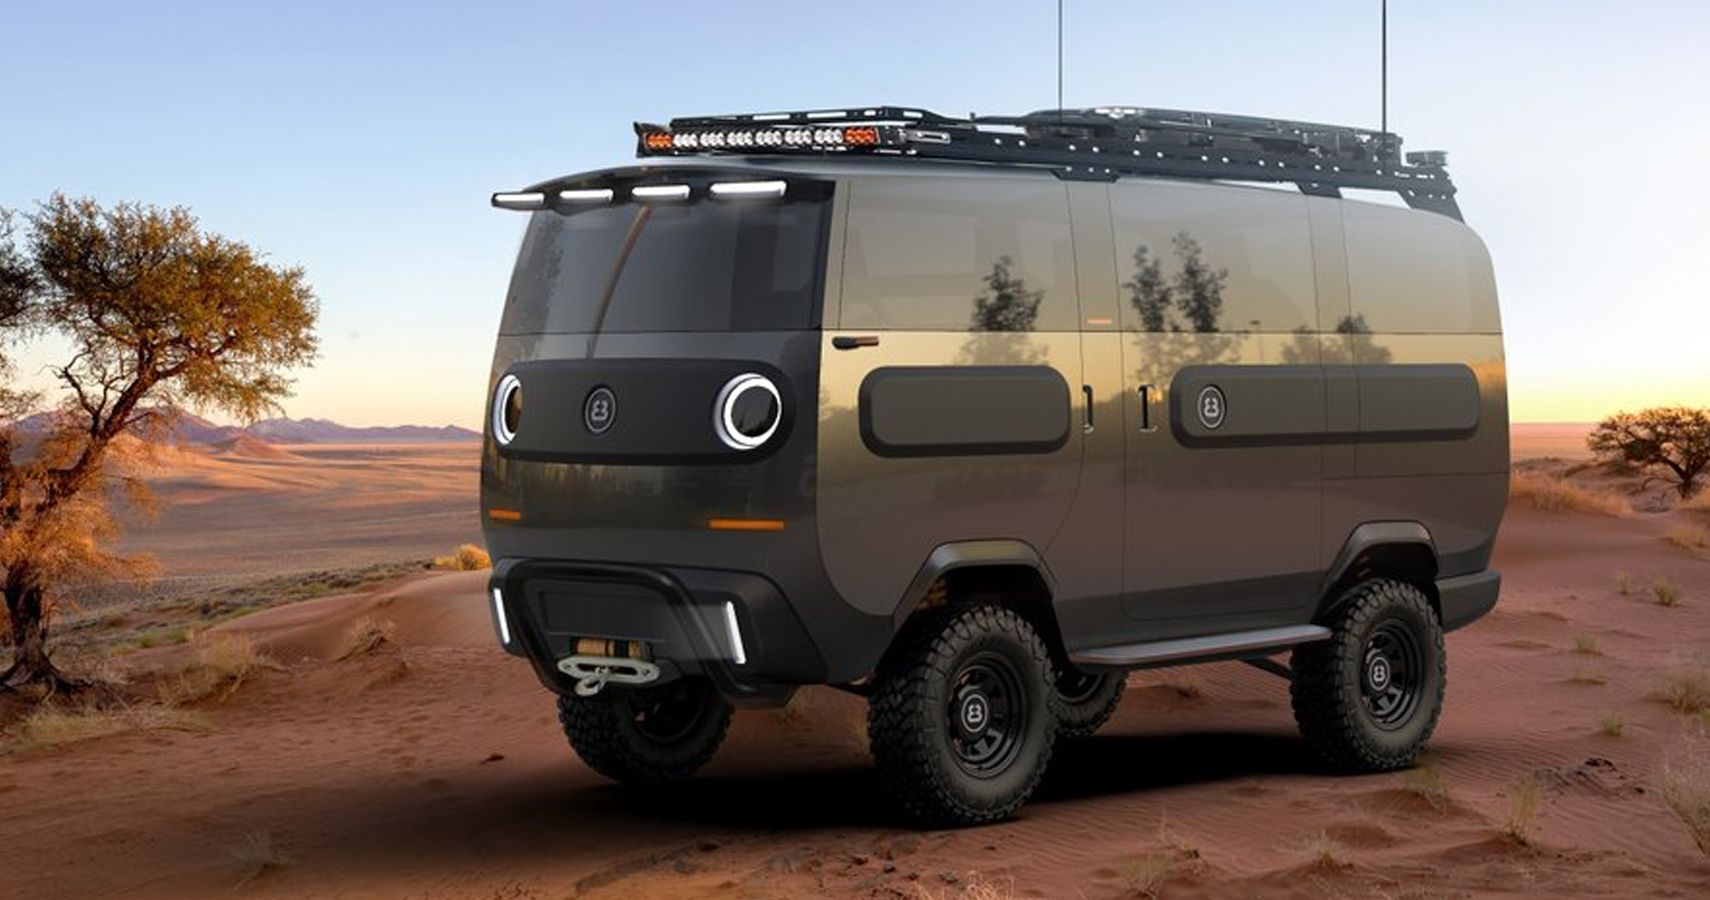 The eBussy Modular EV Transforms Into 10 Different Vehicles